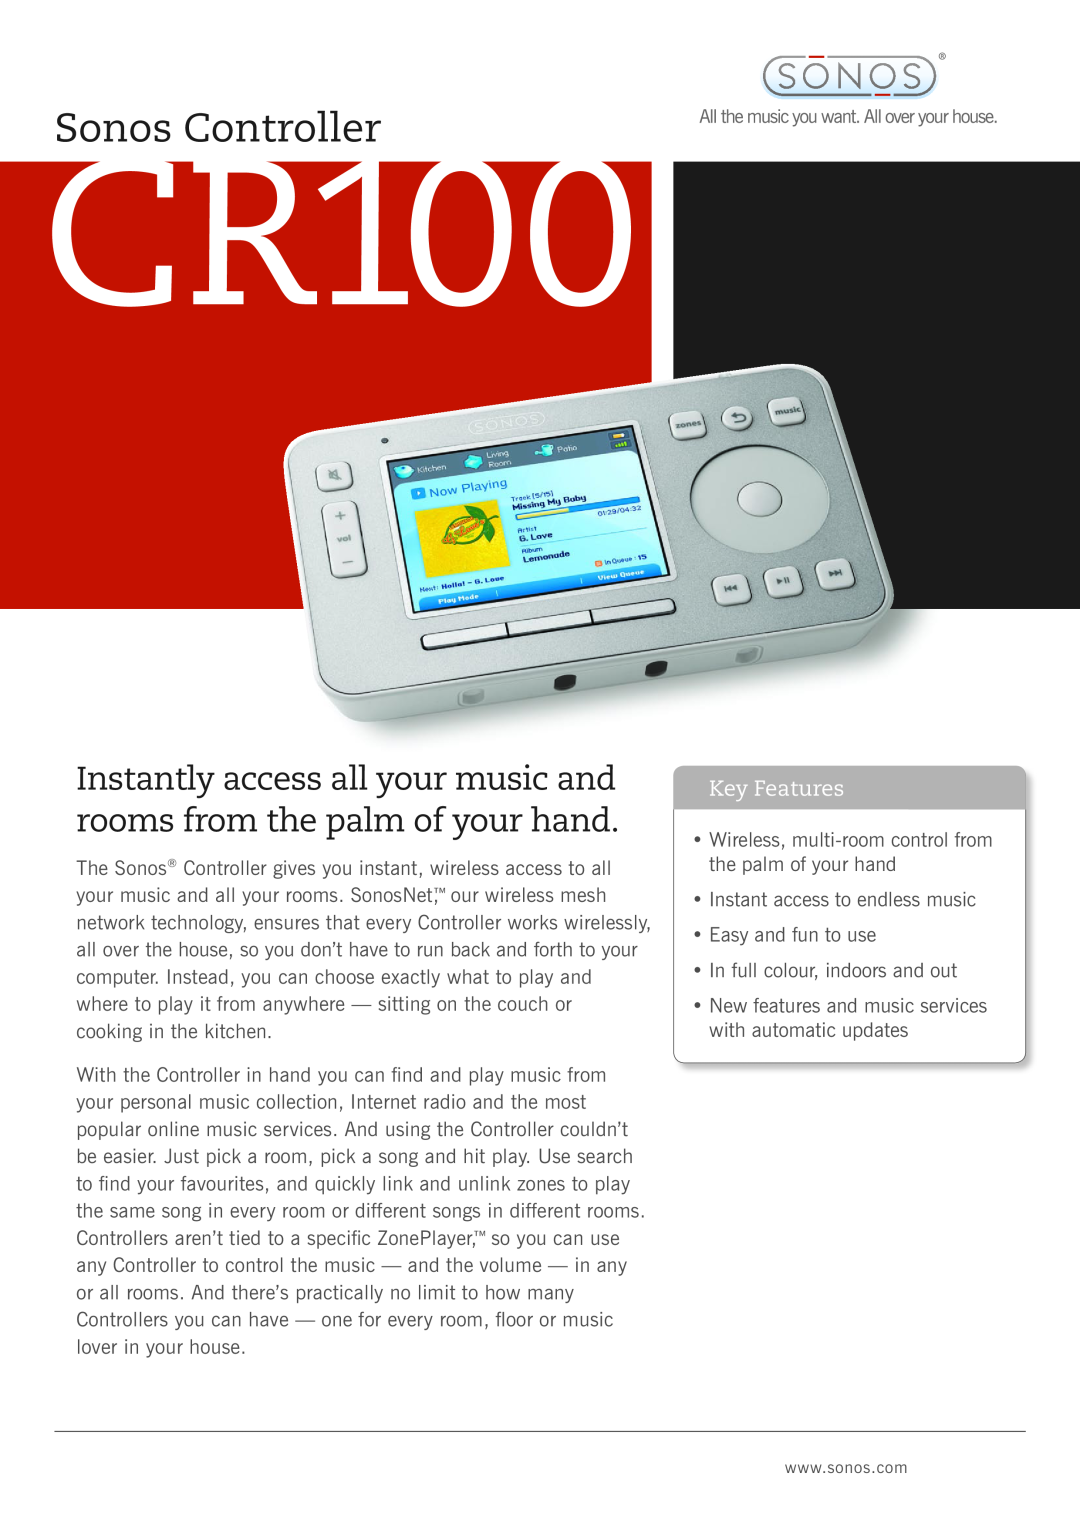 Sonos CR100 manual Sonos Controller, Instantly access all your music and rooms from the palm of your hand, Key Features 